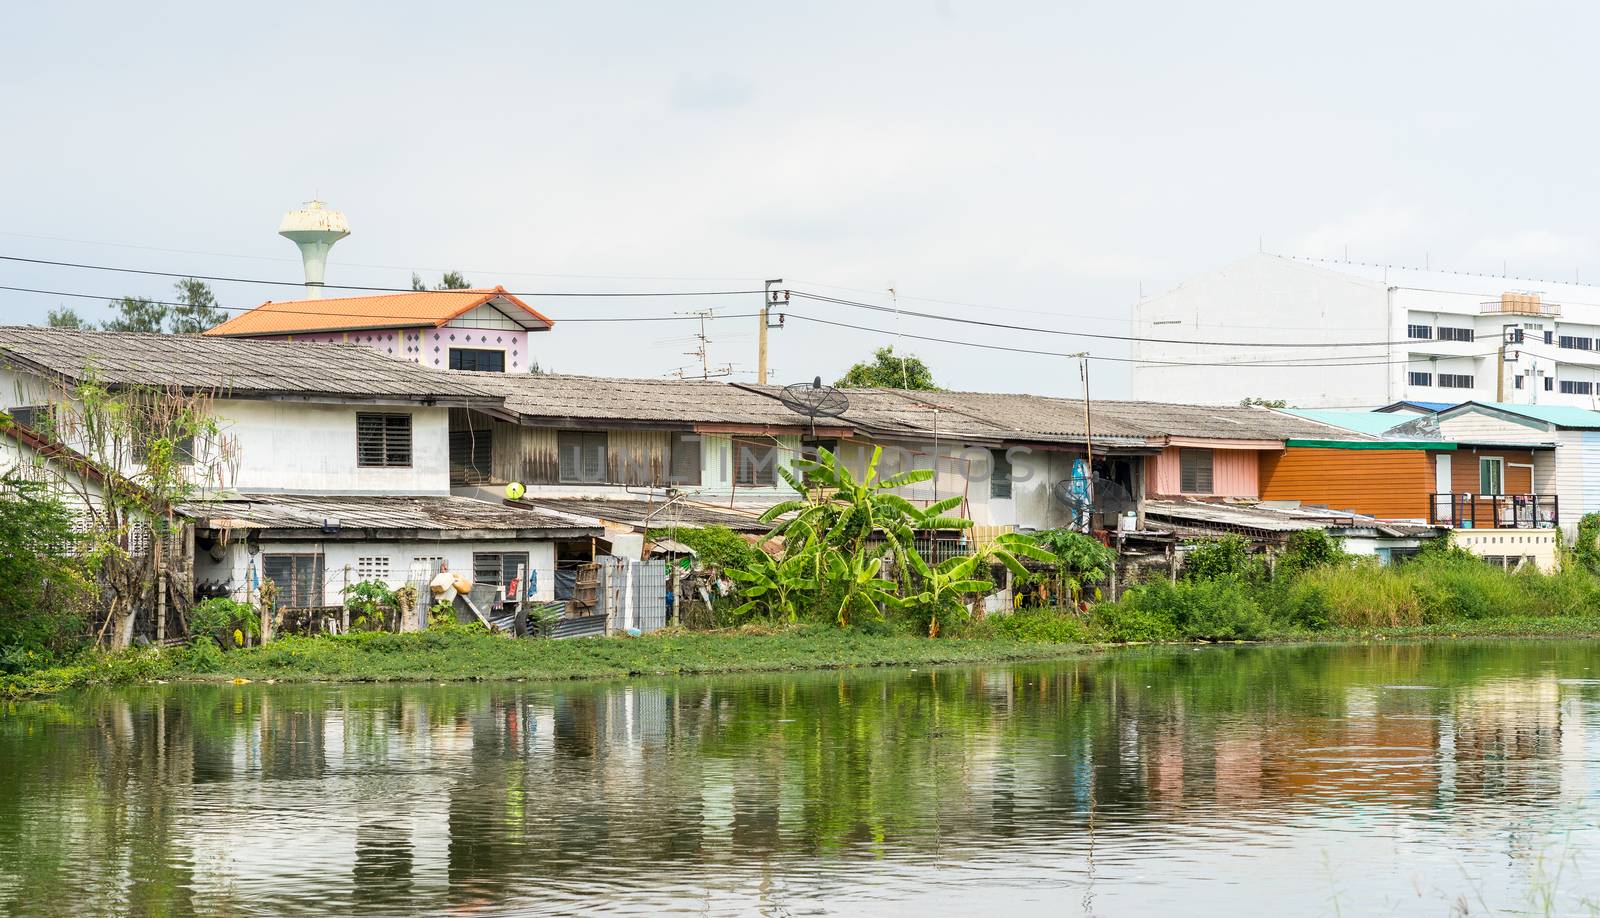 Waterfront community in Thailand by domonite